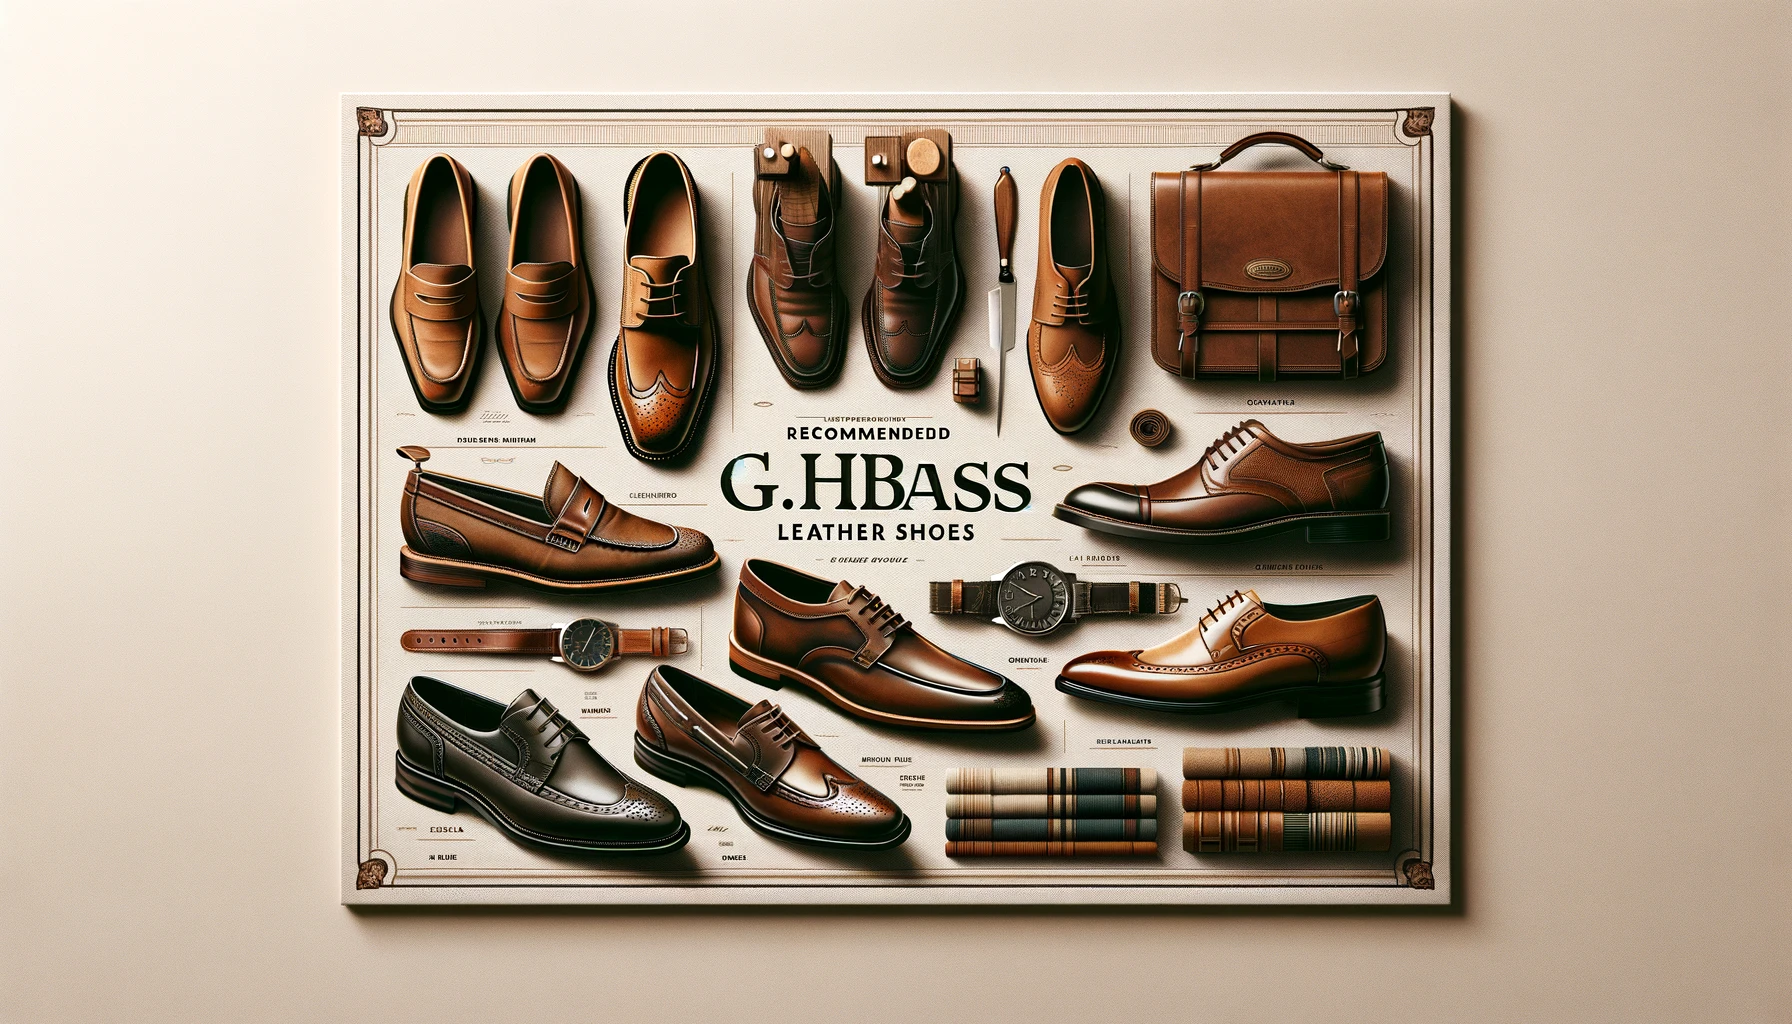 An attractive presentation of recommended G.H.BASS leather shoes. The image features a selection of the most popular and stylish shoes, including loafers, oxfords, and boots. The layout is sophisticated, emphasizing the high-quality craftsmanship and design. The background is simple yet elegant, ensuring the shoes stand out. Include the text 'G.H.BASS' prominently in the image.